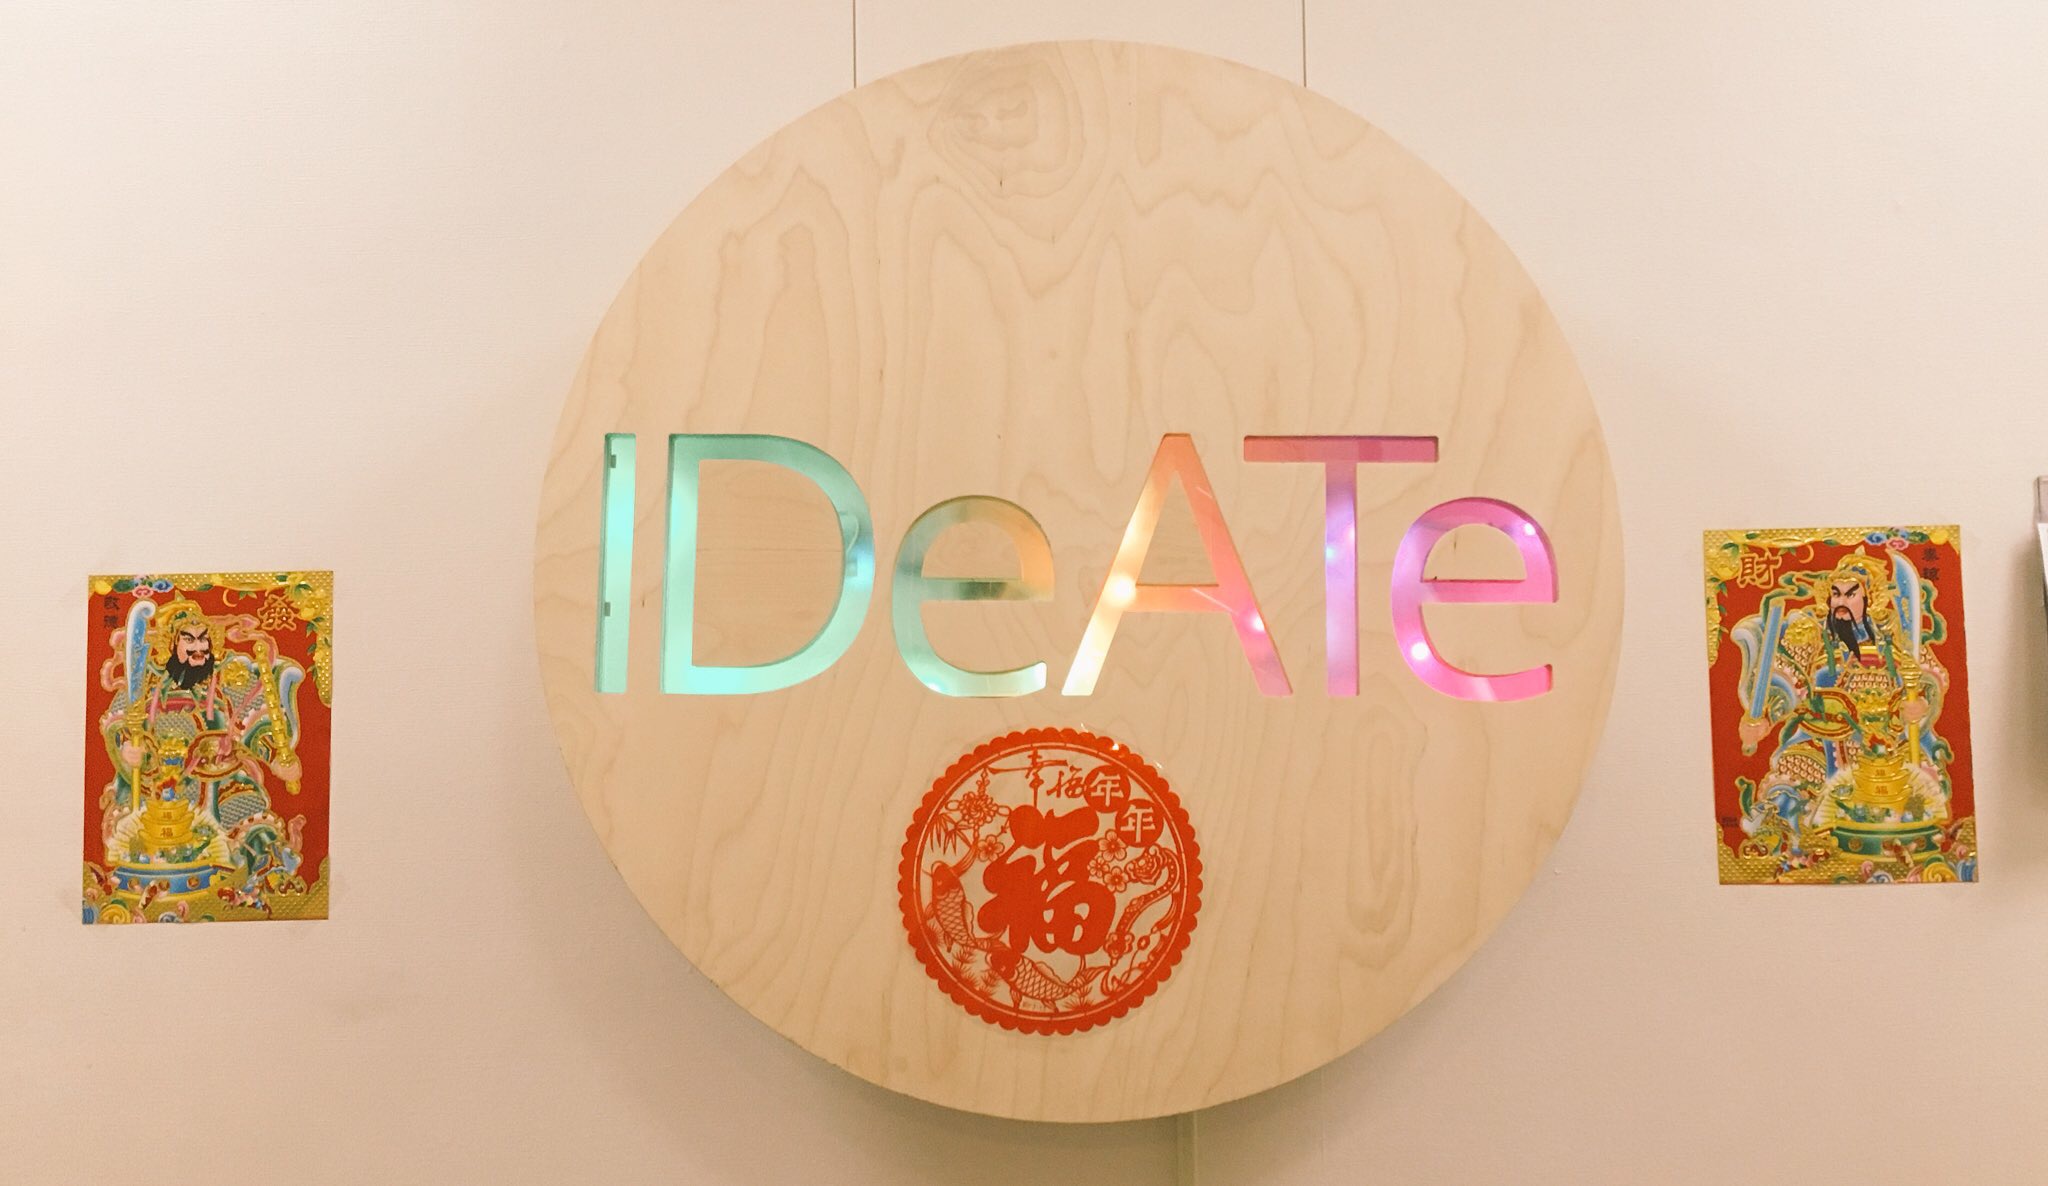 Chinese New Year Decorations on the IDeATe sign